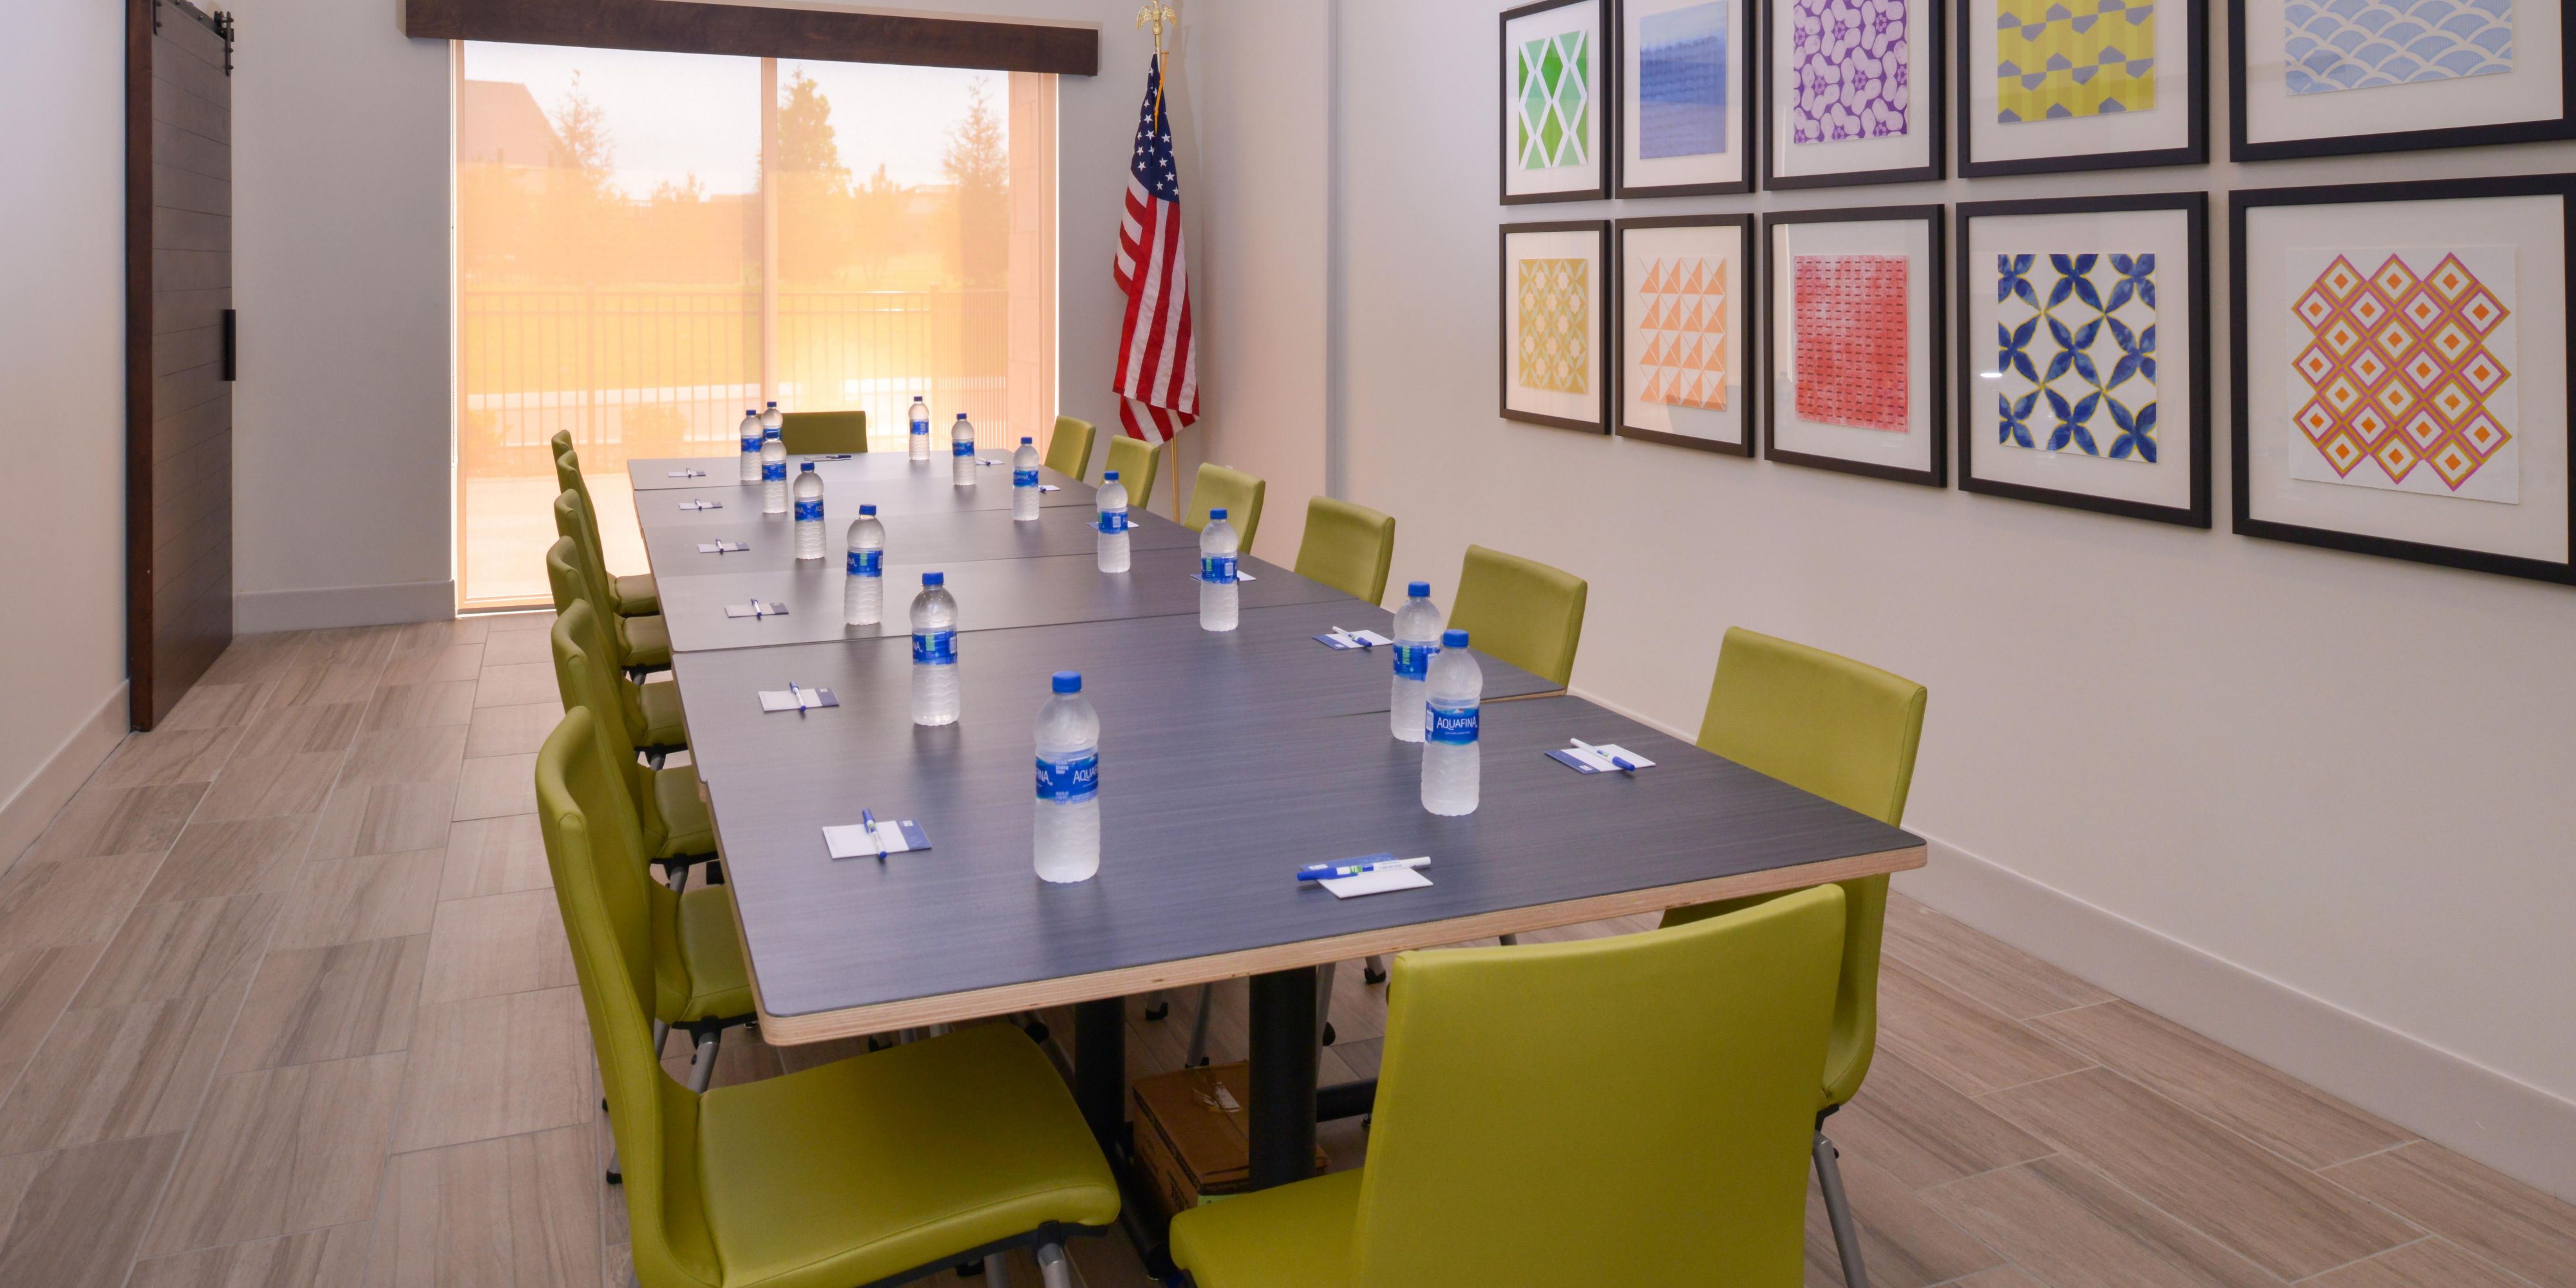 Experience our versatile space for your next event. Perfect for small to medium sized groups, we will work with you to set up all the essentials you need for your meeting including catering and a/v equipment.